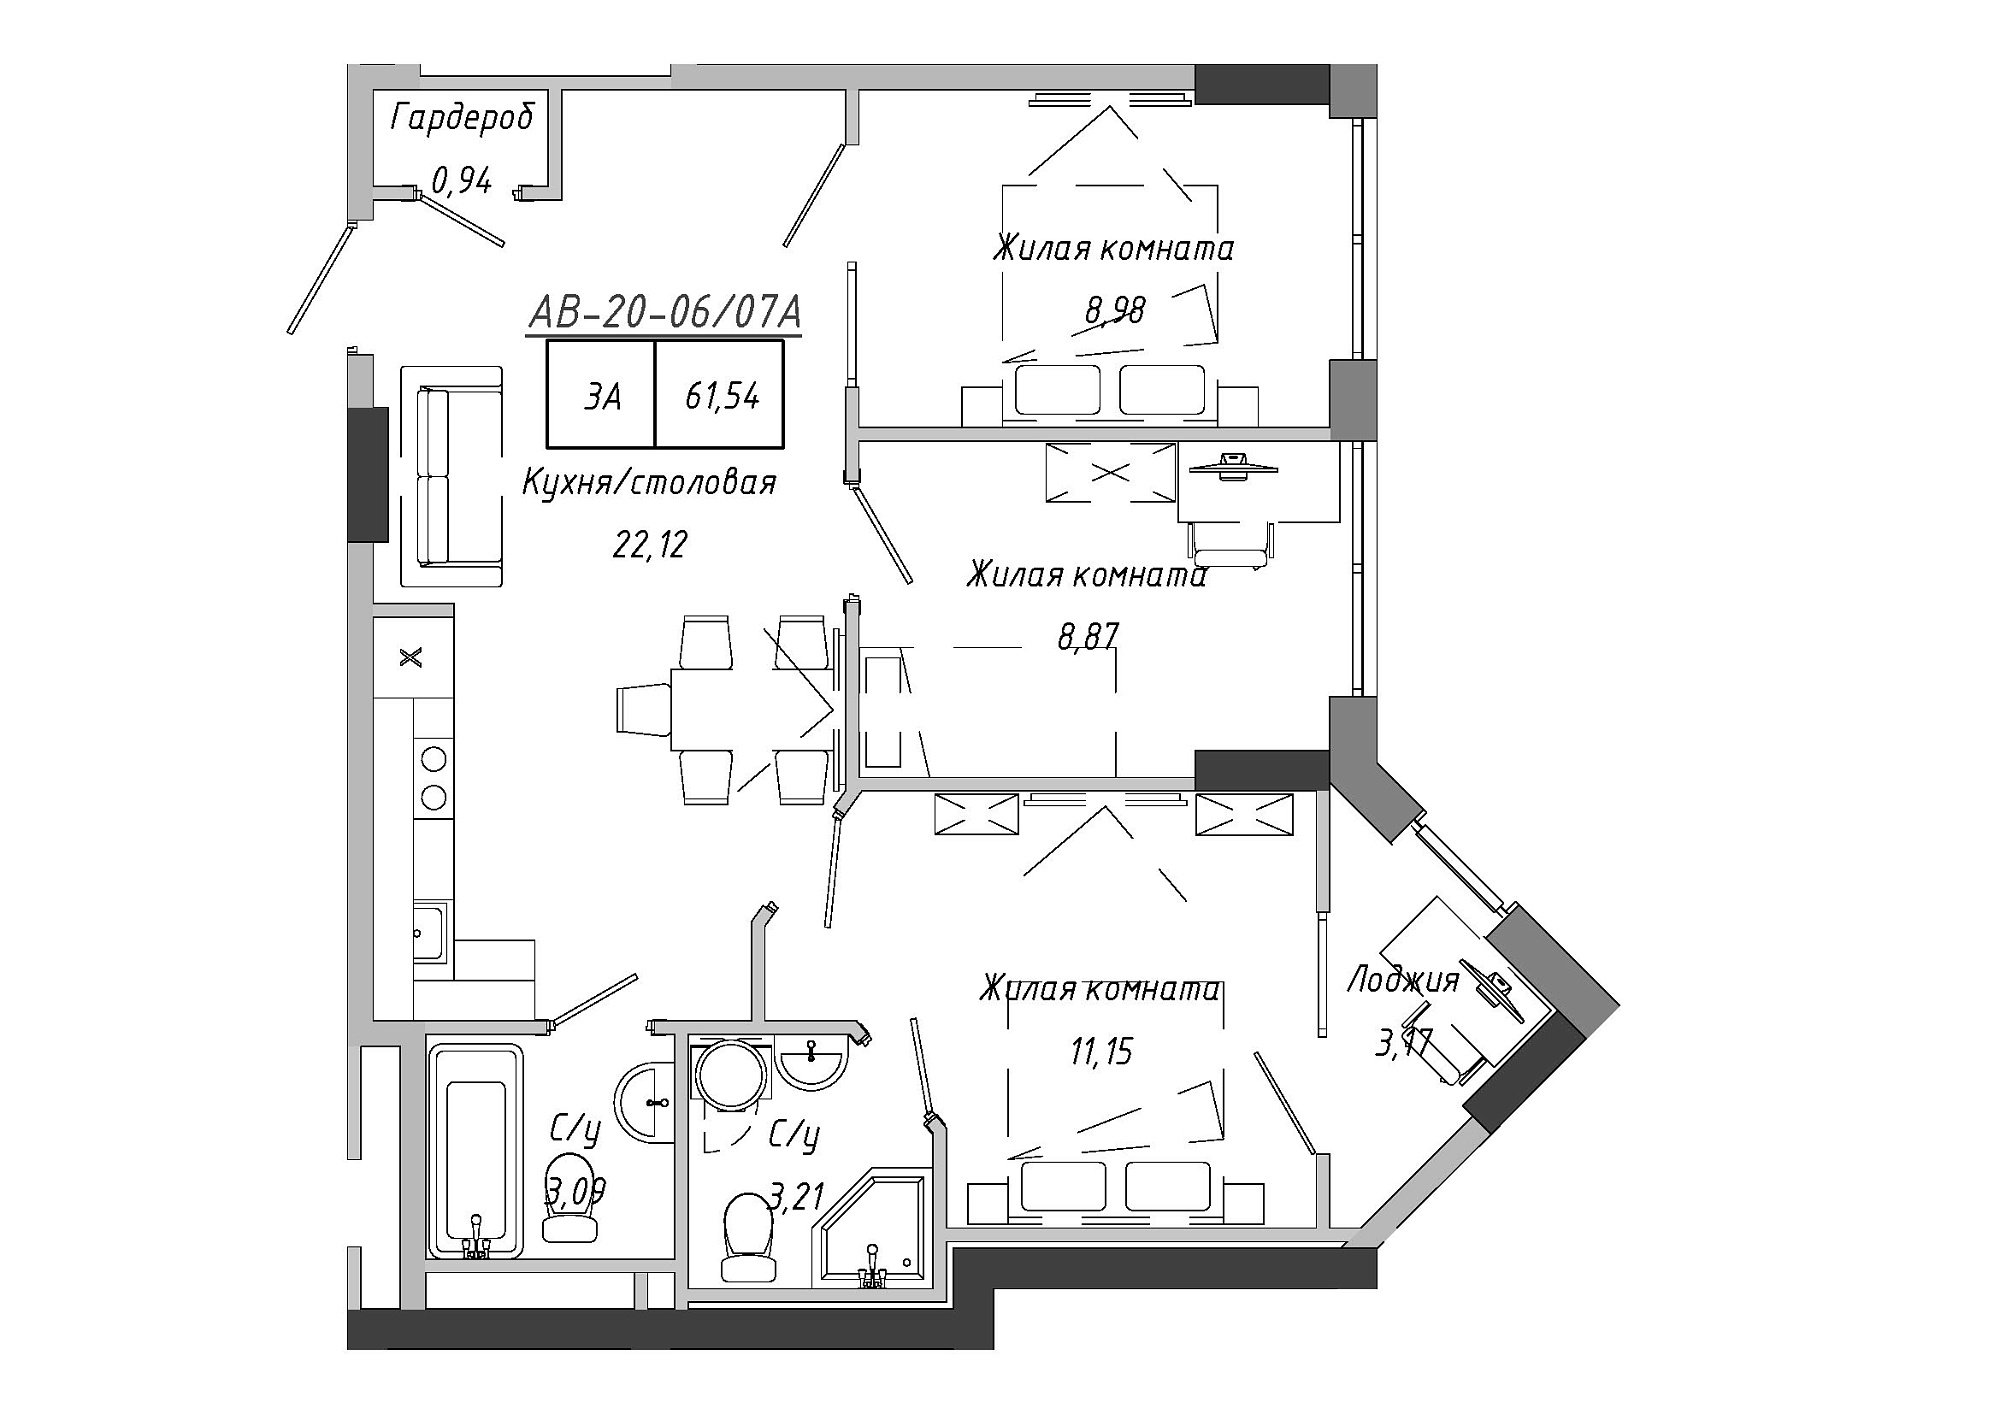 Planning 3-rm flats area 62.67m2, AB-20-06/0007а.